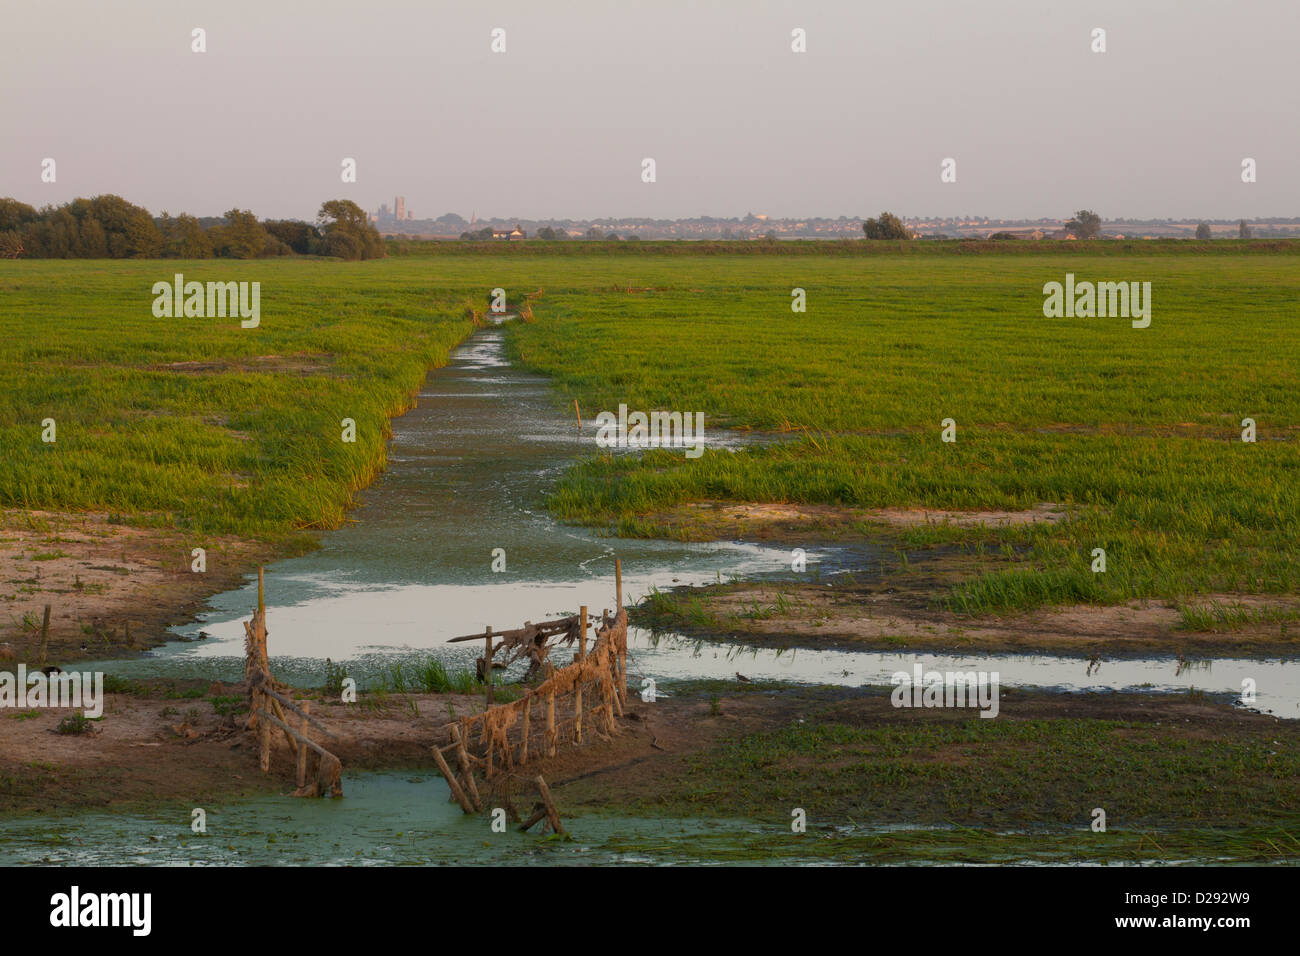 View across RSPB Ouse Washes wetland nature reserve to Ely Cathedral. Cambridgeshire, England, September. Stock Photo